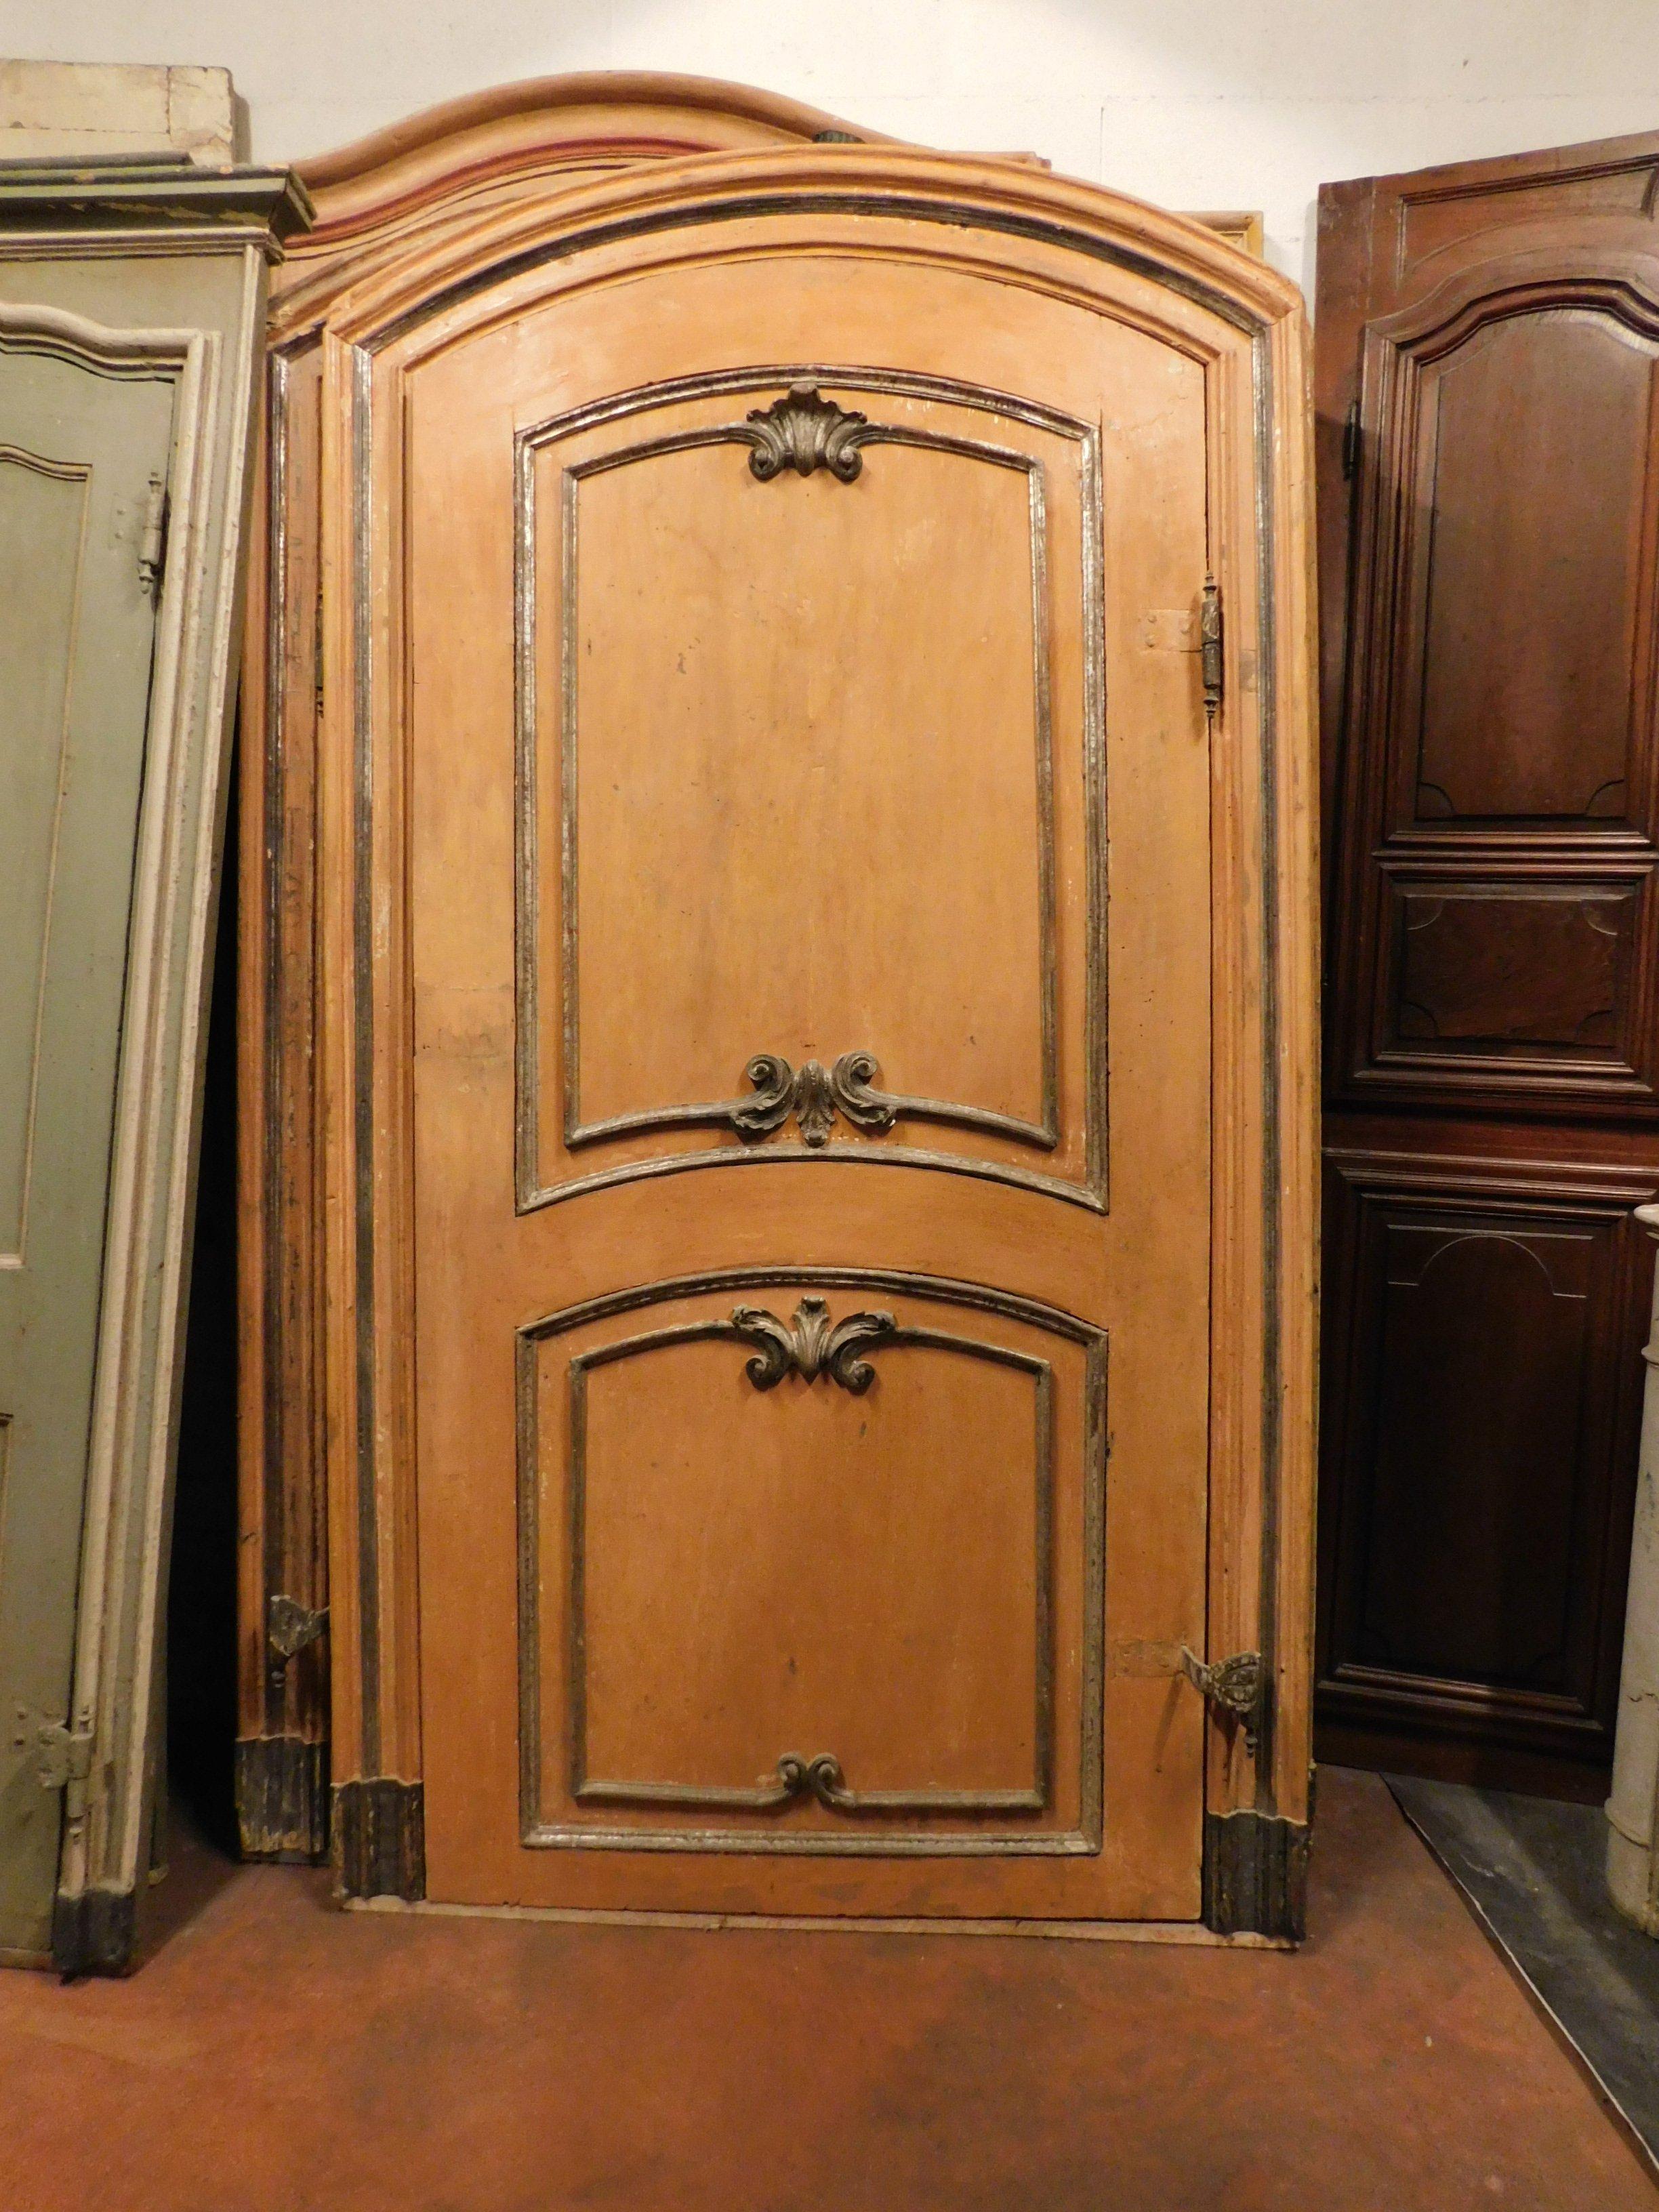 Hand-Painted 4 Antique Orange Lacquered Wooden Doors with Silver Moldings, Late 1600, Italy For Sale